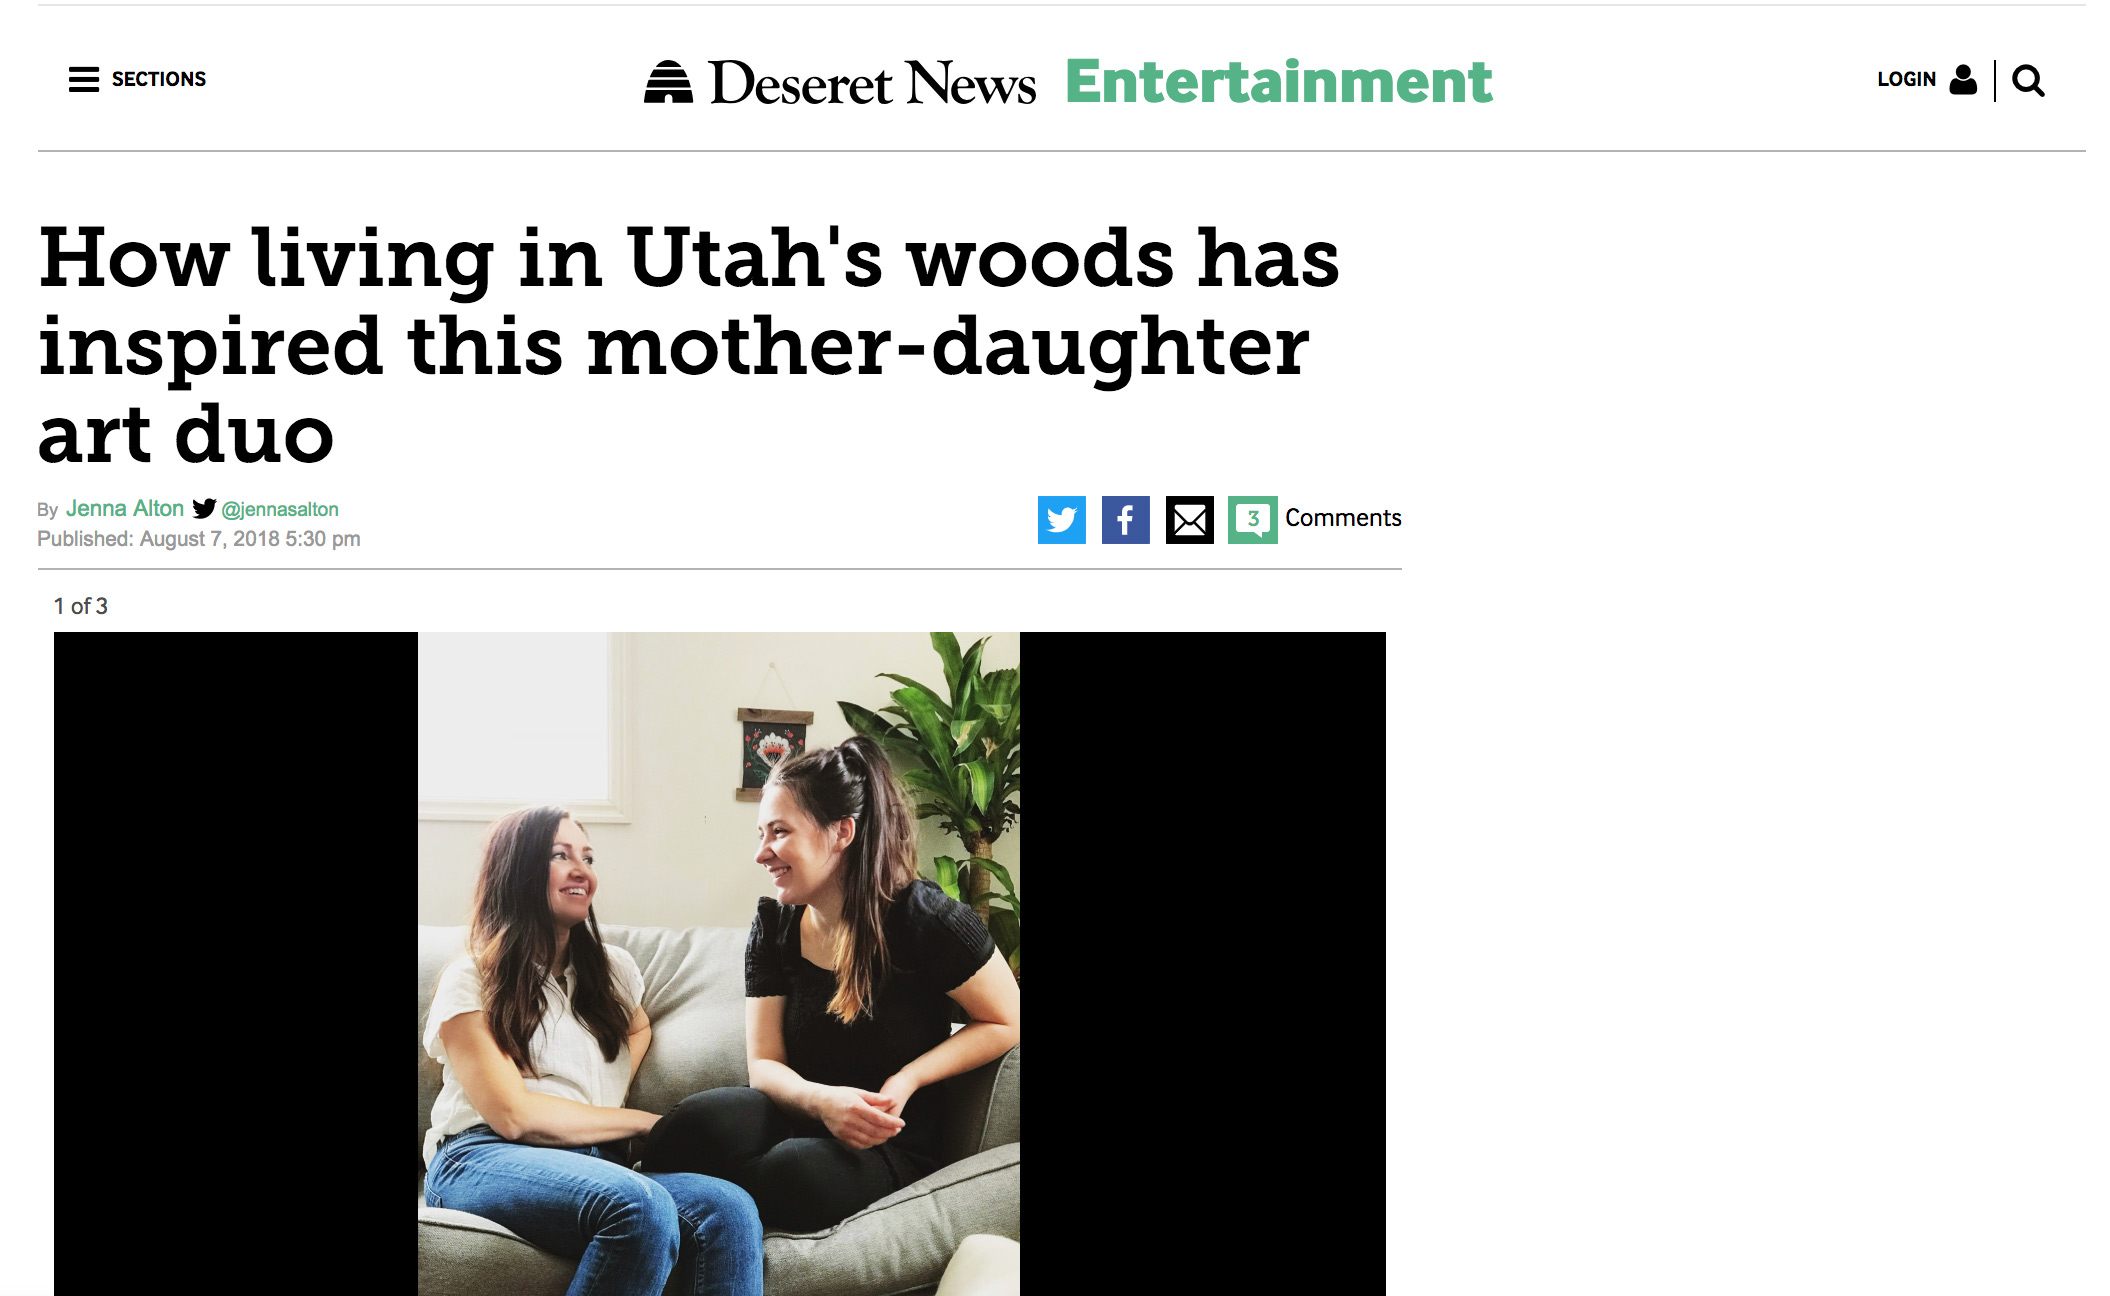 Deseret News: How living in Utah’s woods has inspired this mother-daughter art duo